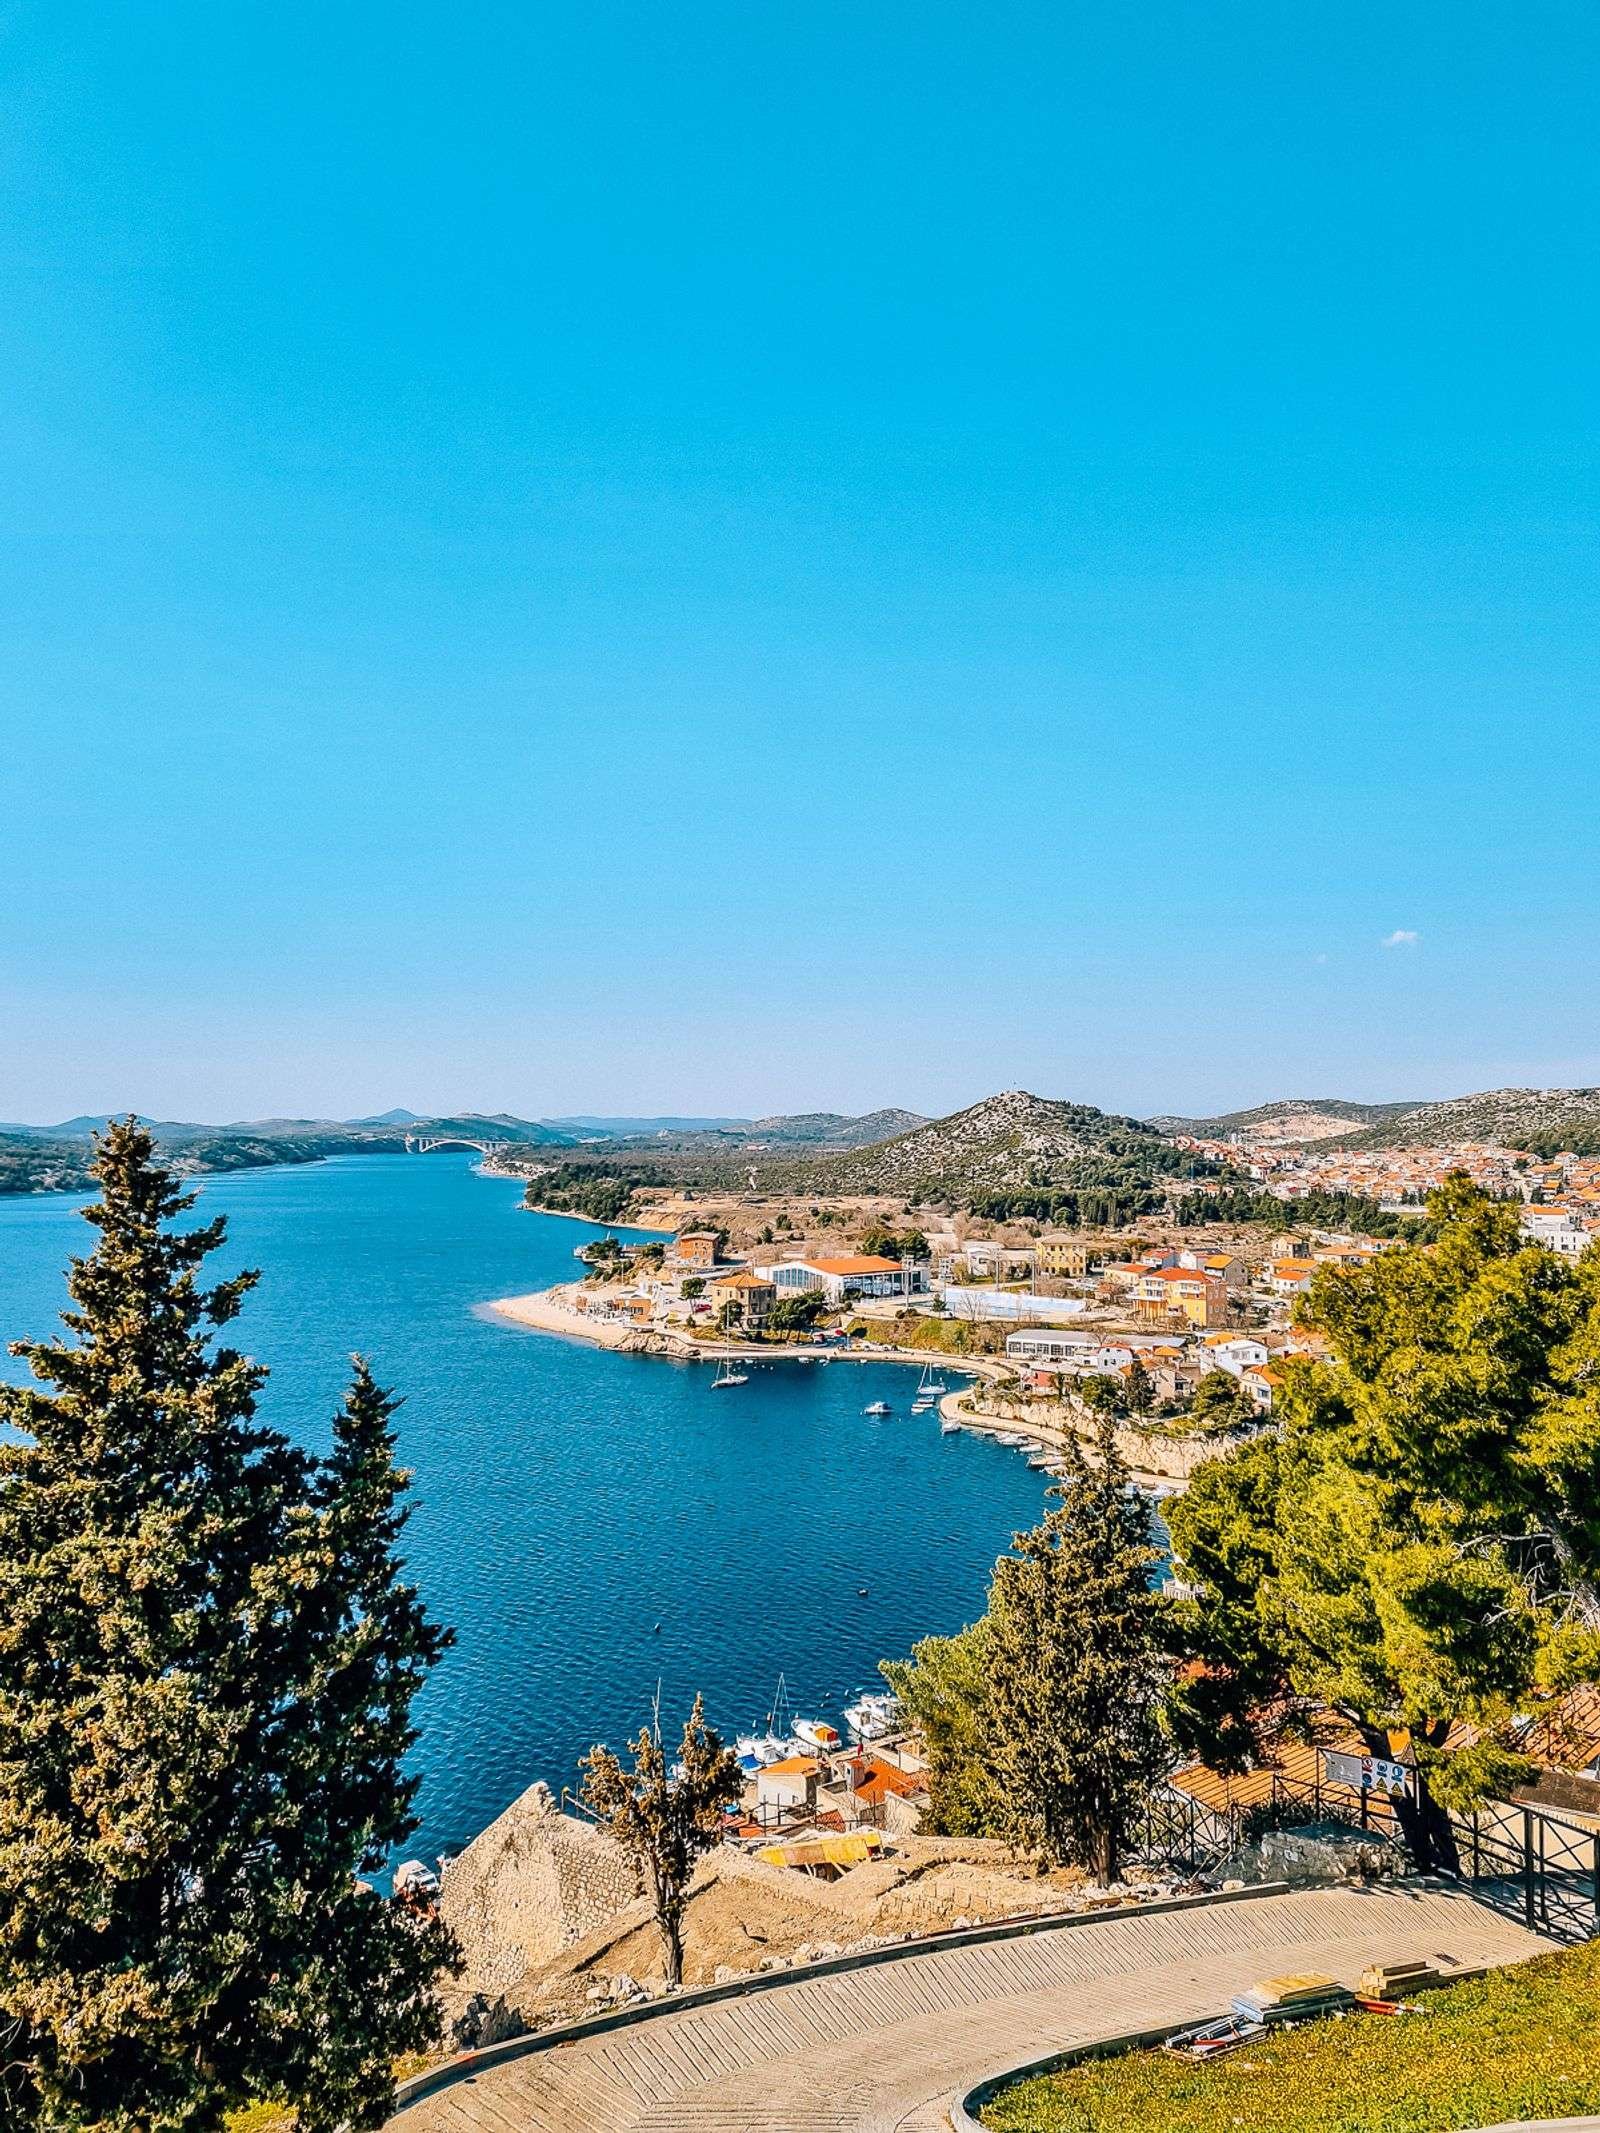 view from a hill, looking down on the coastline of Sibenik